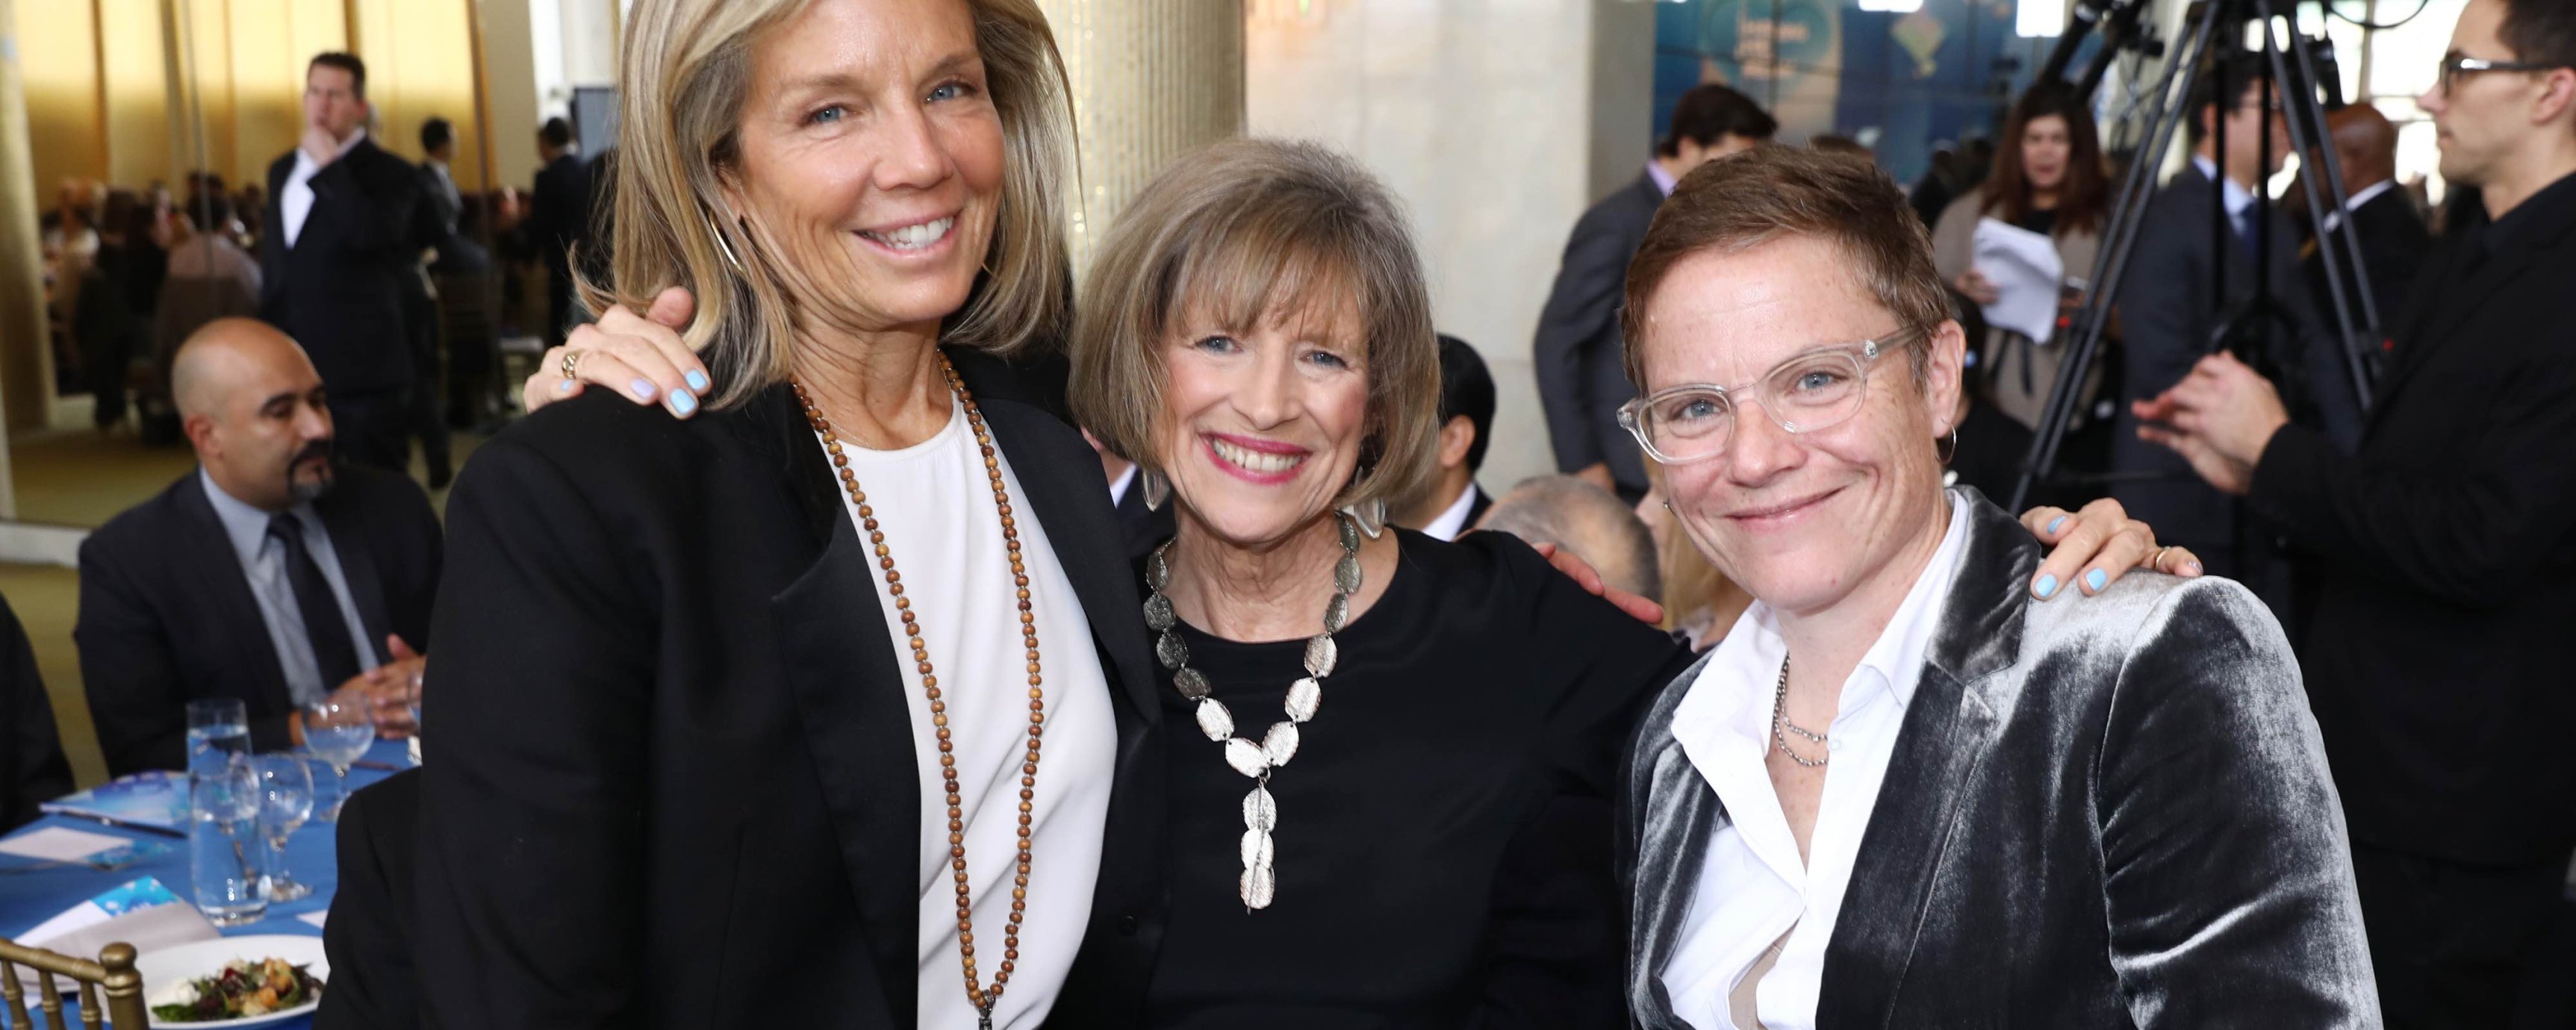 Three older white women smiling and standing together